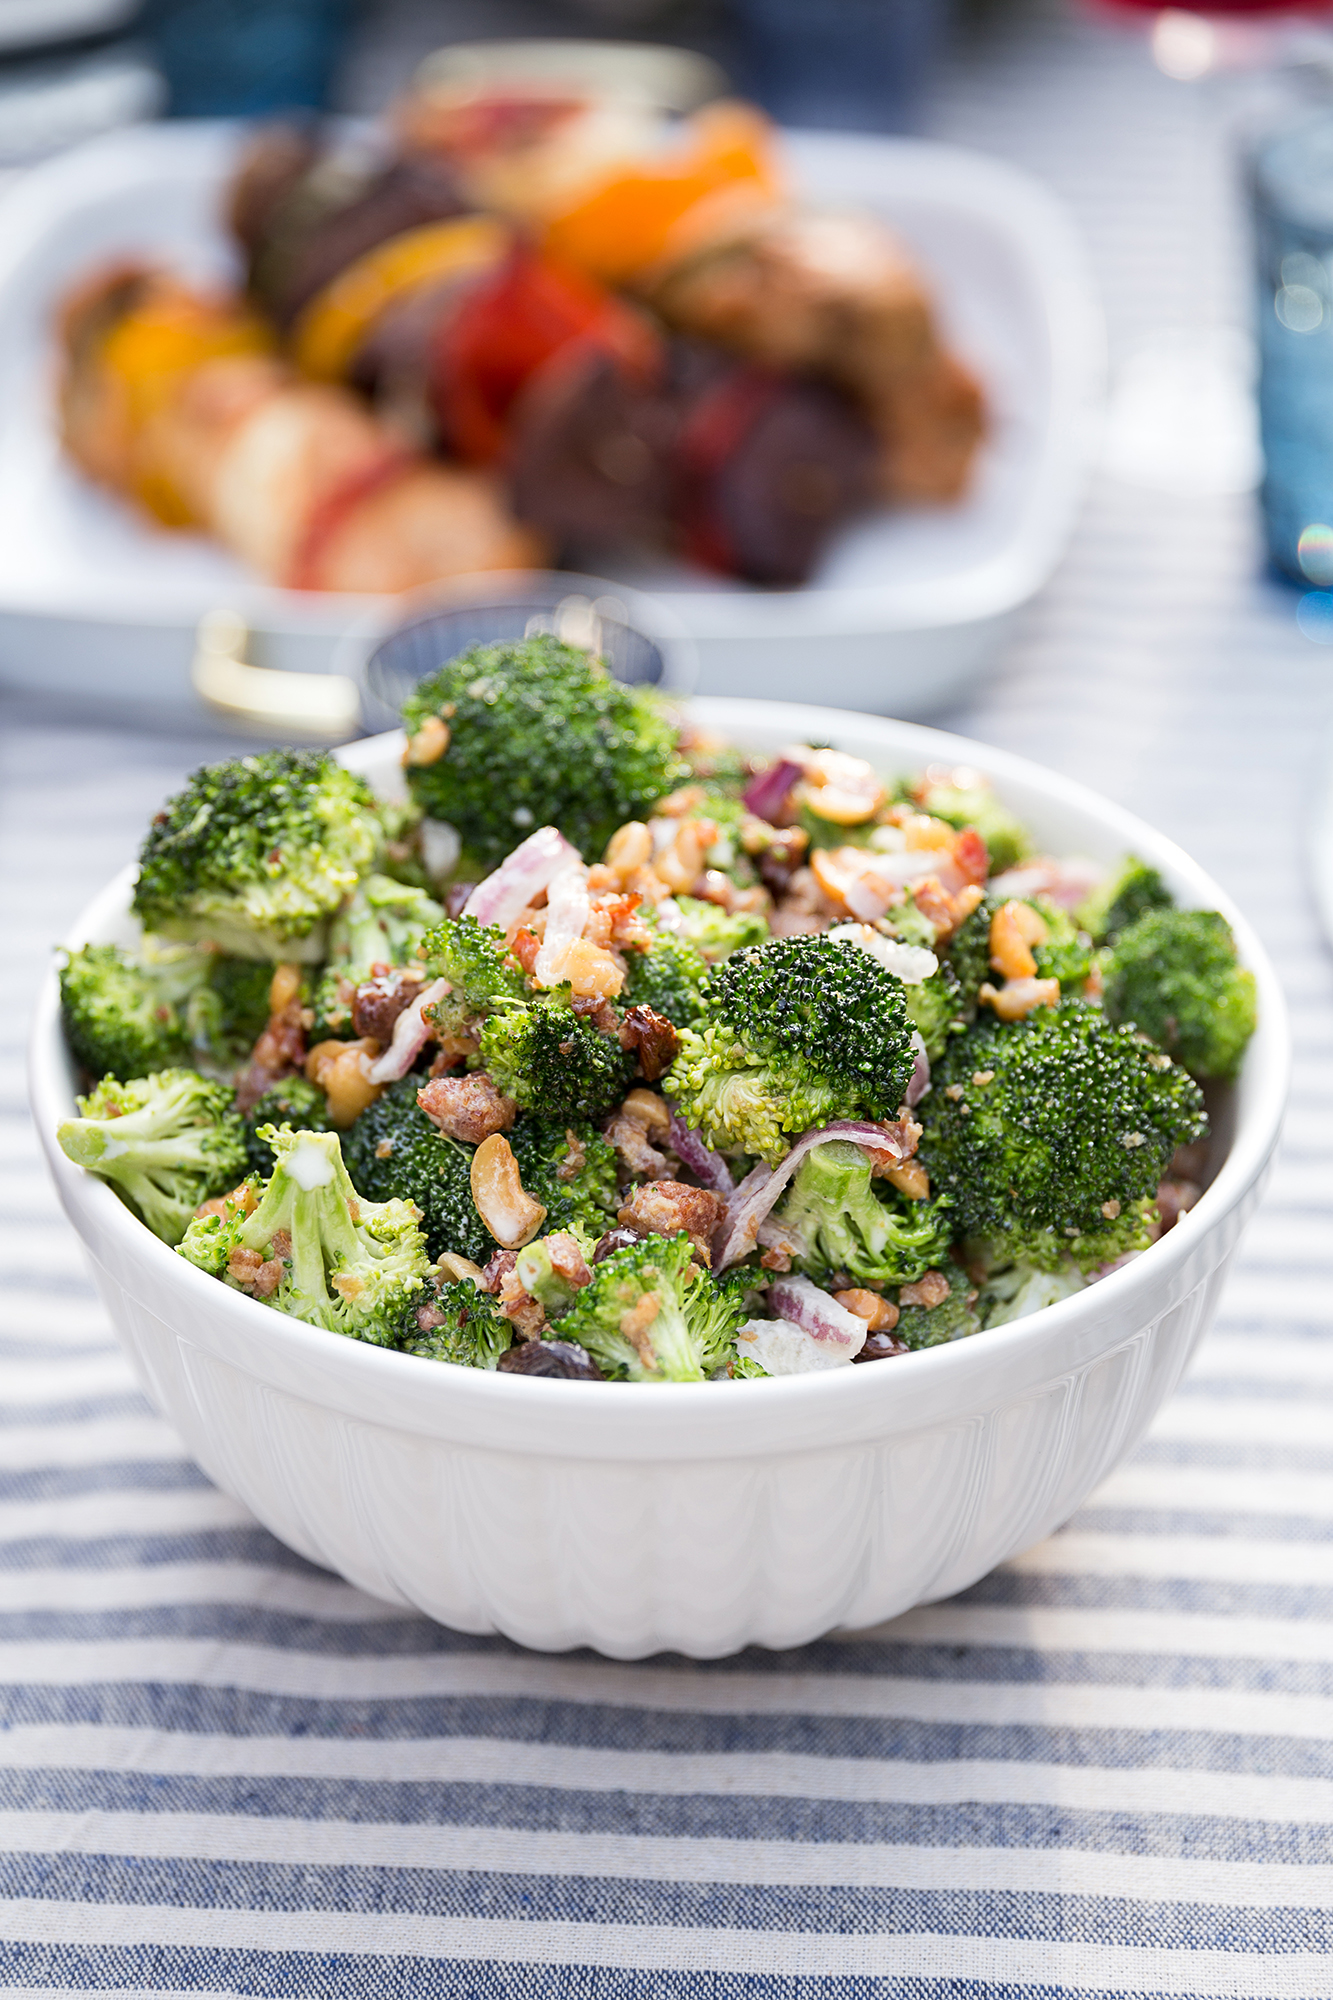 Salads We Love Broccoli Salad in a White Bowl